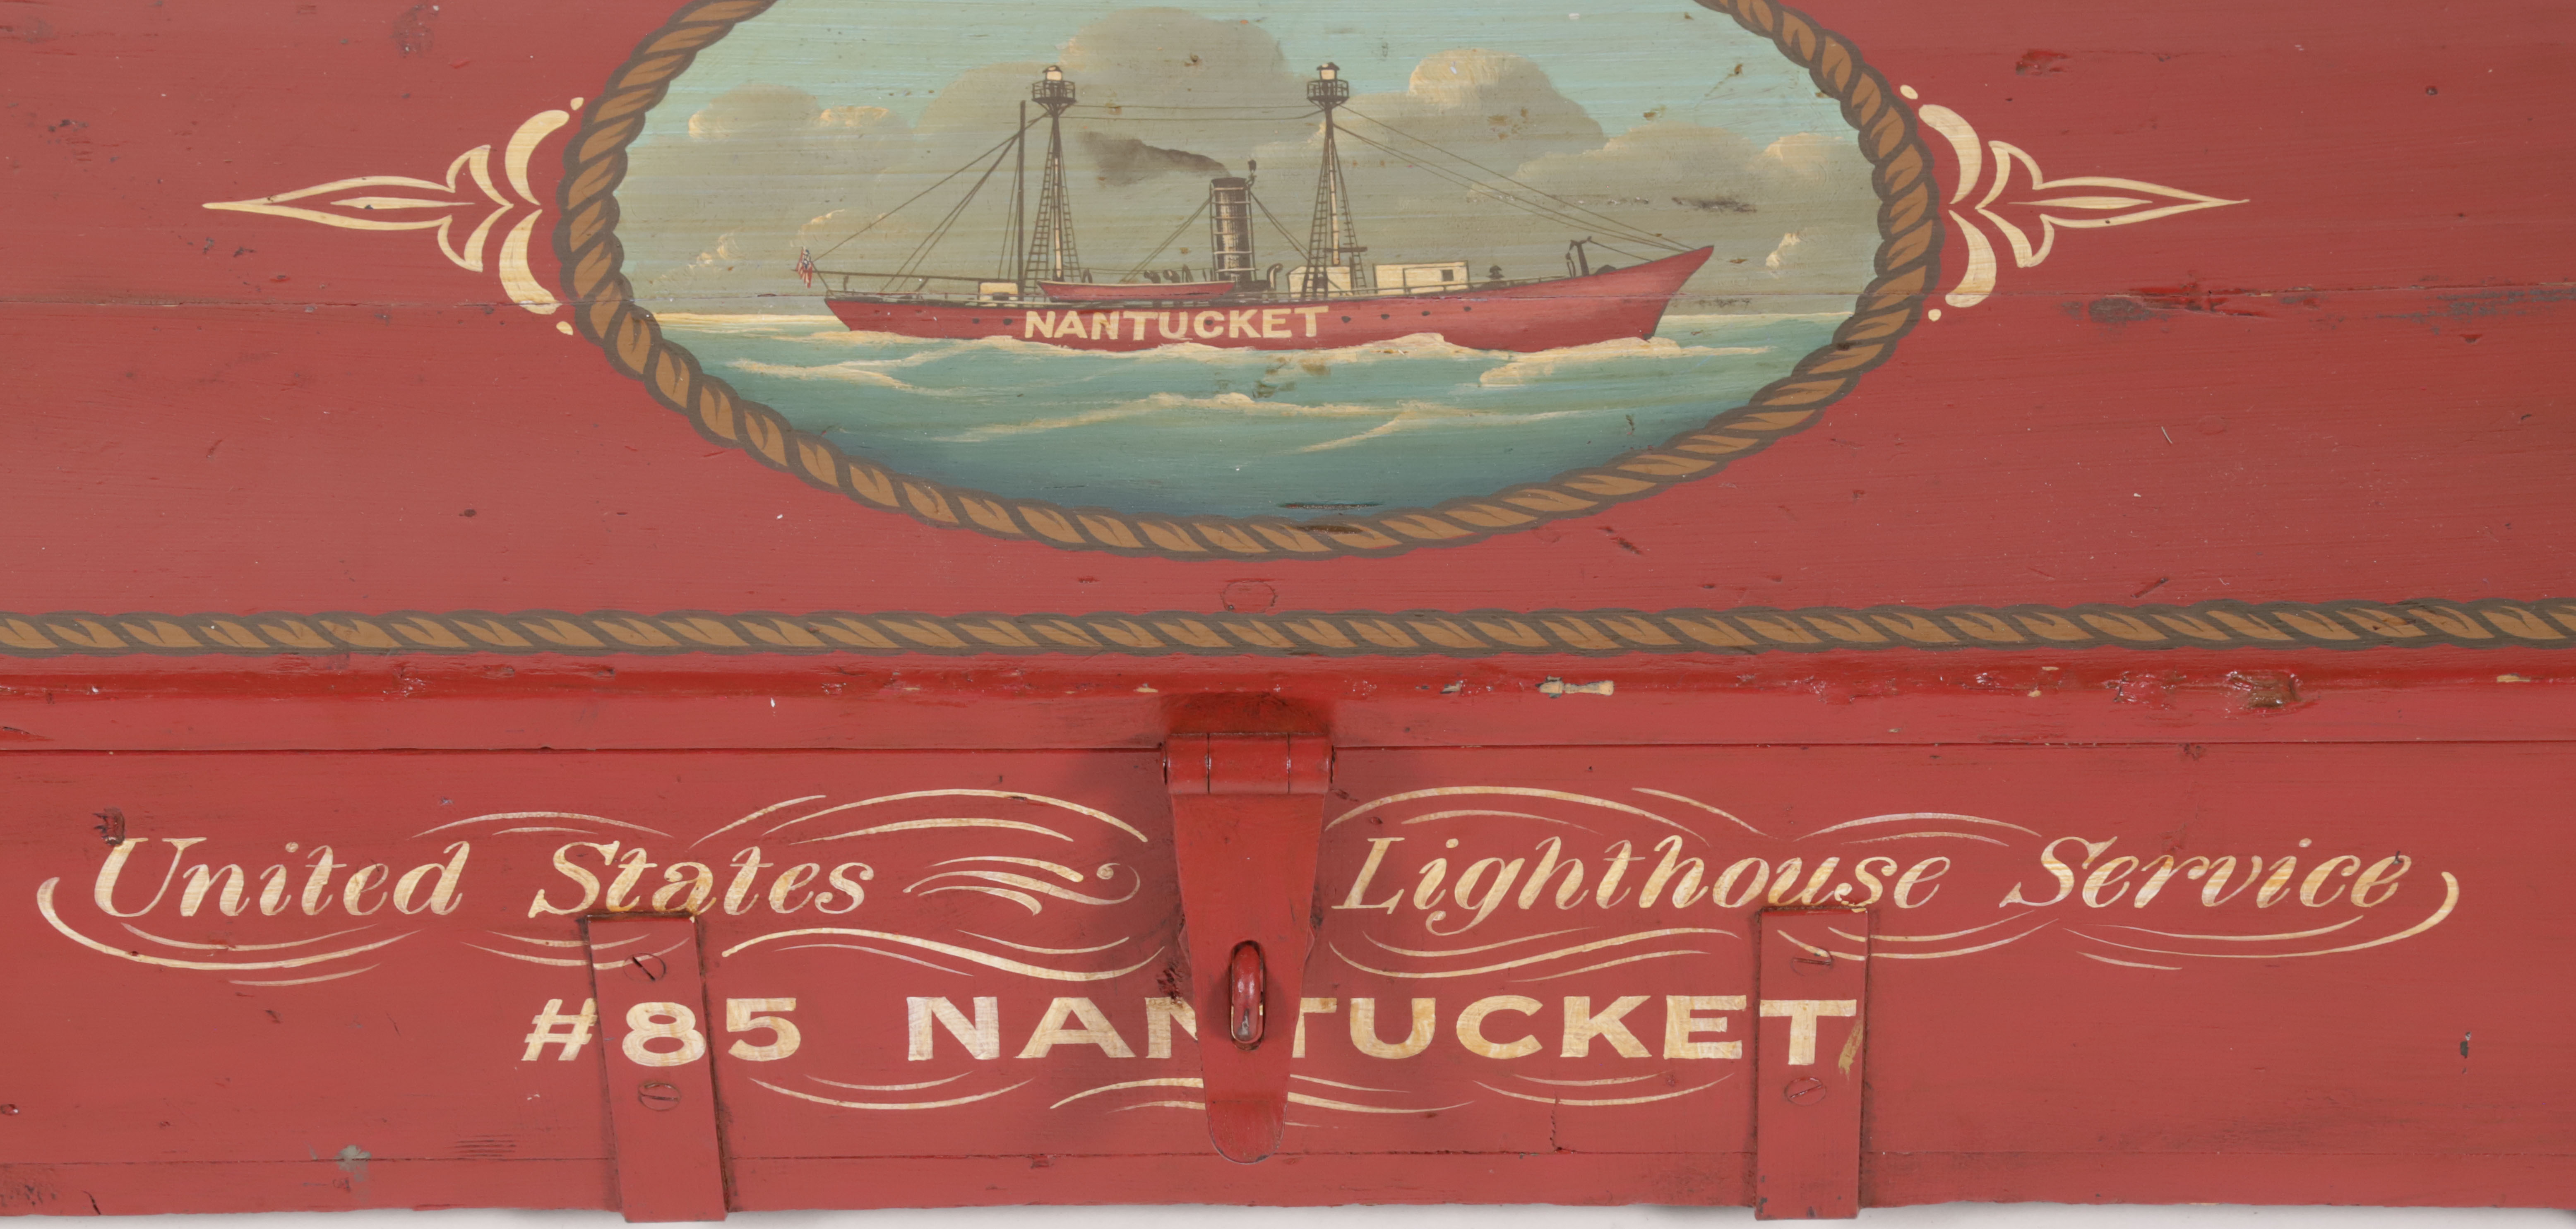 Polychromed Decorated Seaman’s Chest with Vignette of Nantucket Lightship